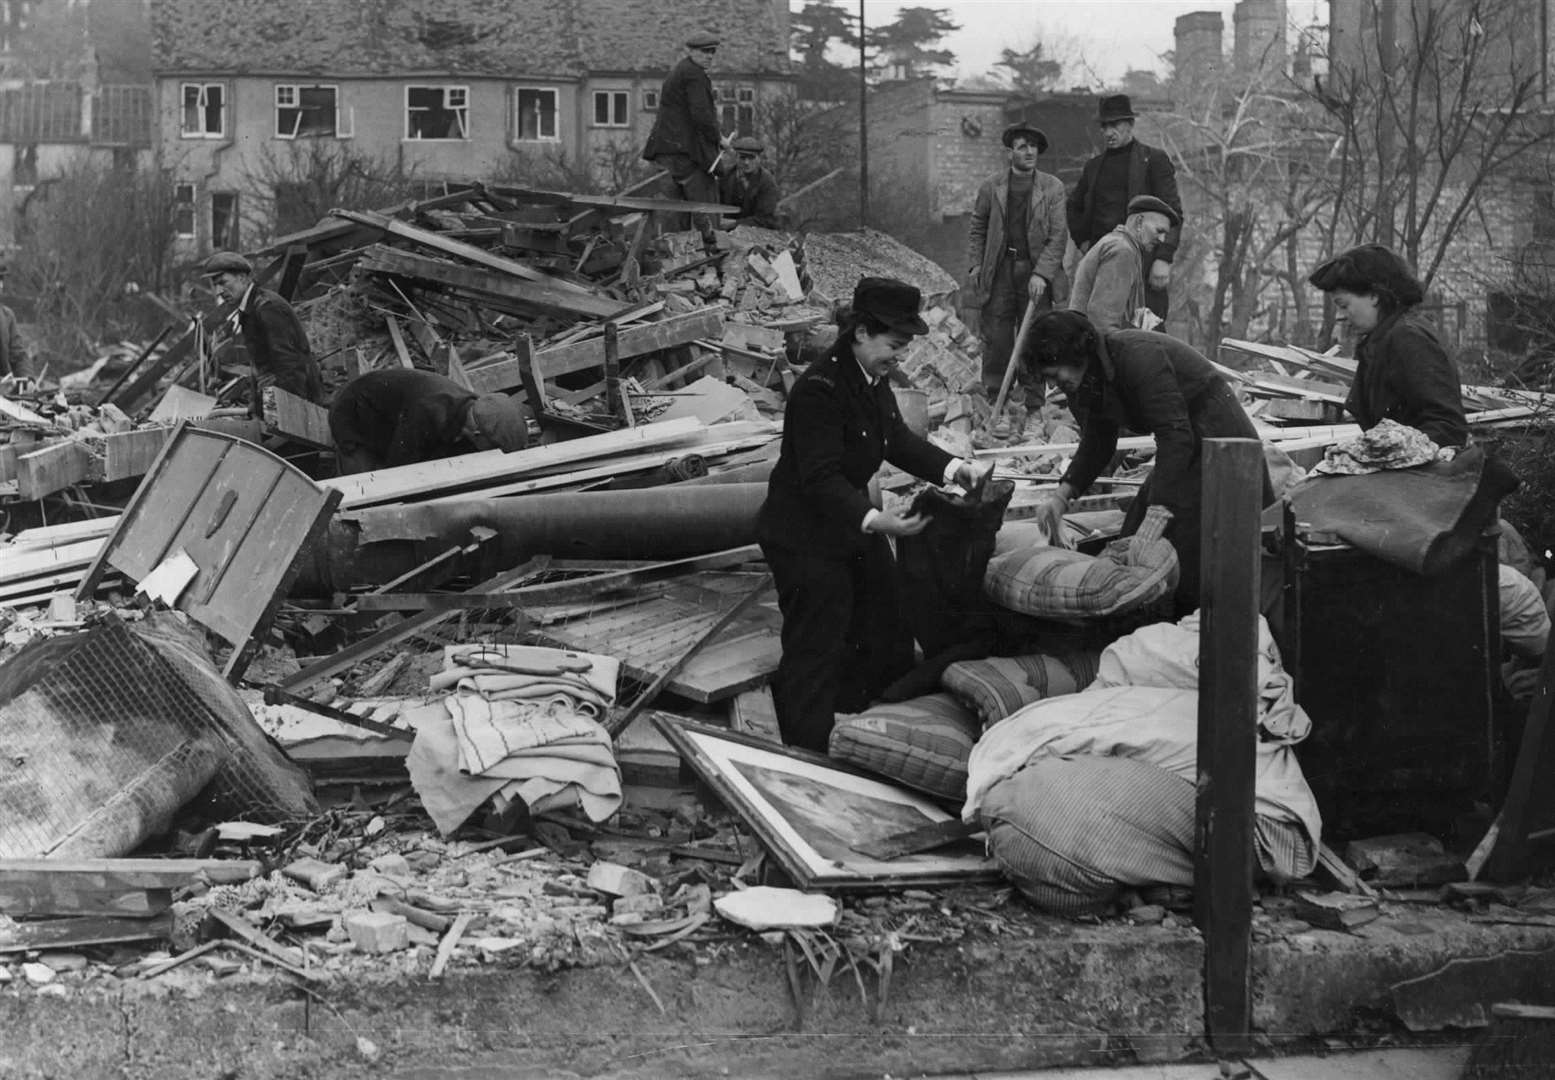 Salvaging bedding from a wrecked house after a shell fell in Portland Avenue, Gravesend on 13th November, 1944. This picture was censored not to be published at the time. Copyright KMG (21437074)